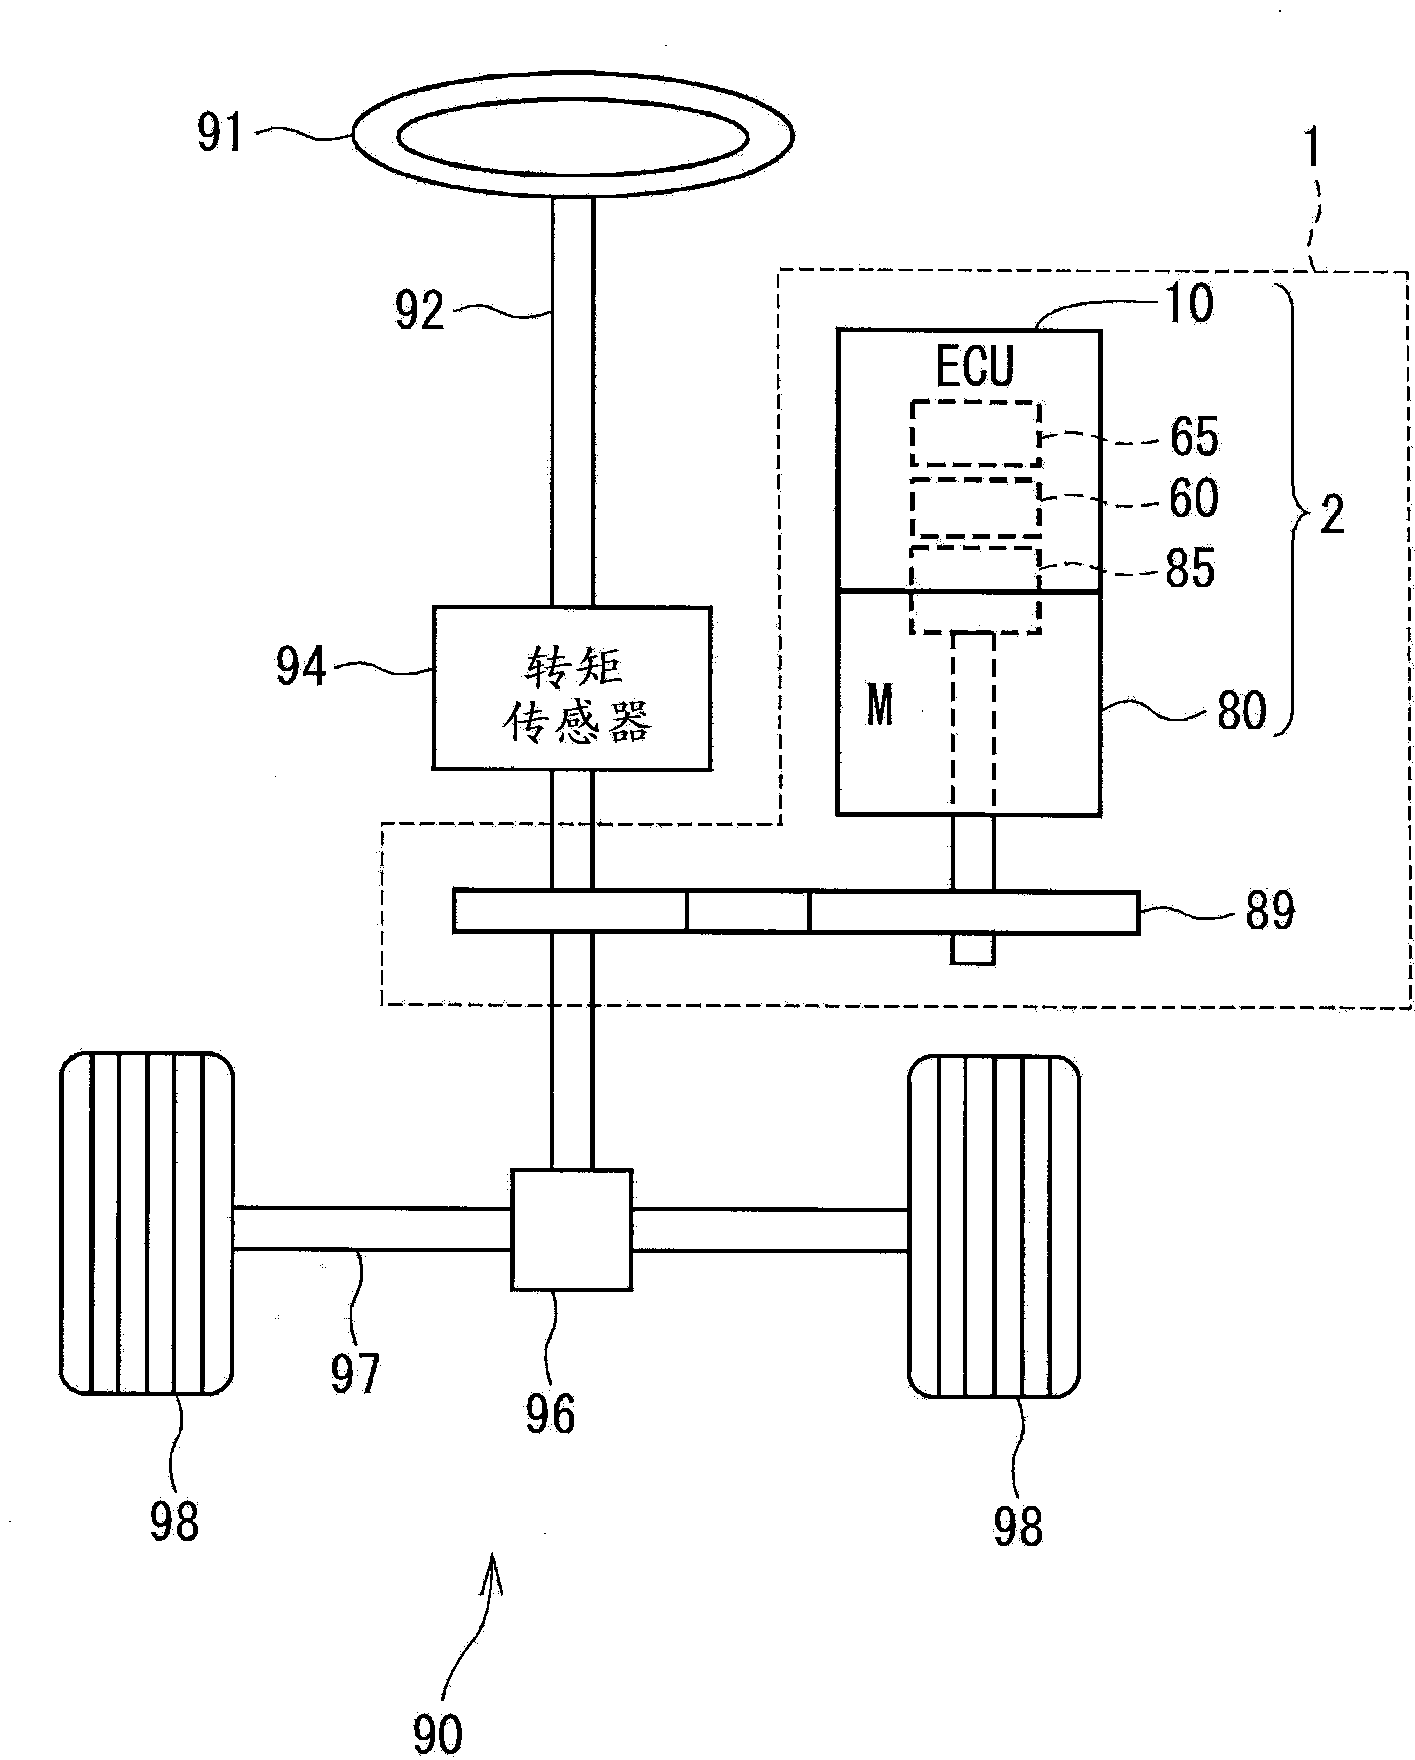 Control device for a three-phase rotating machine